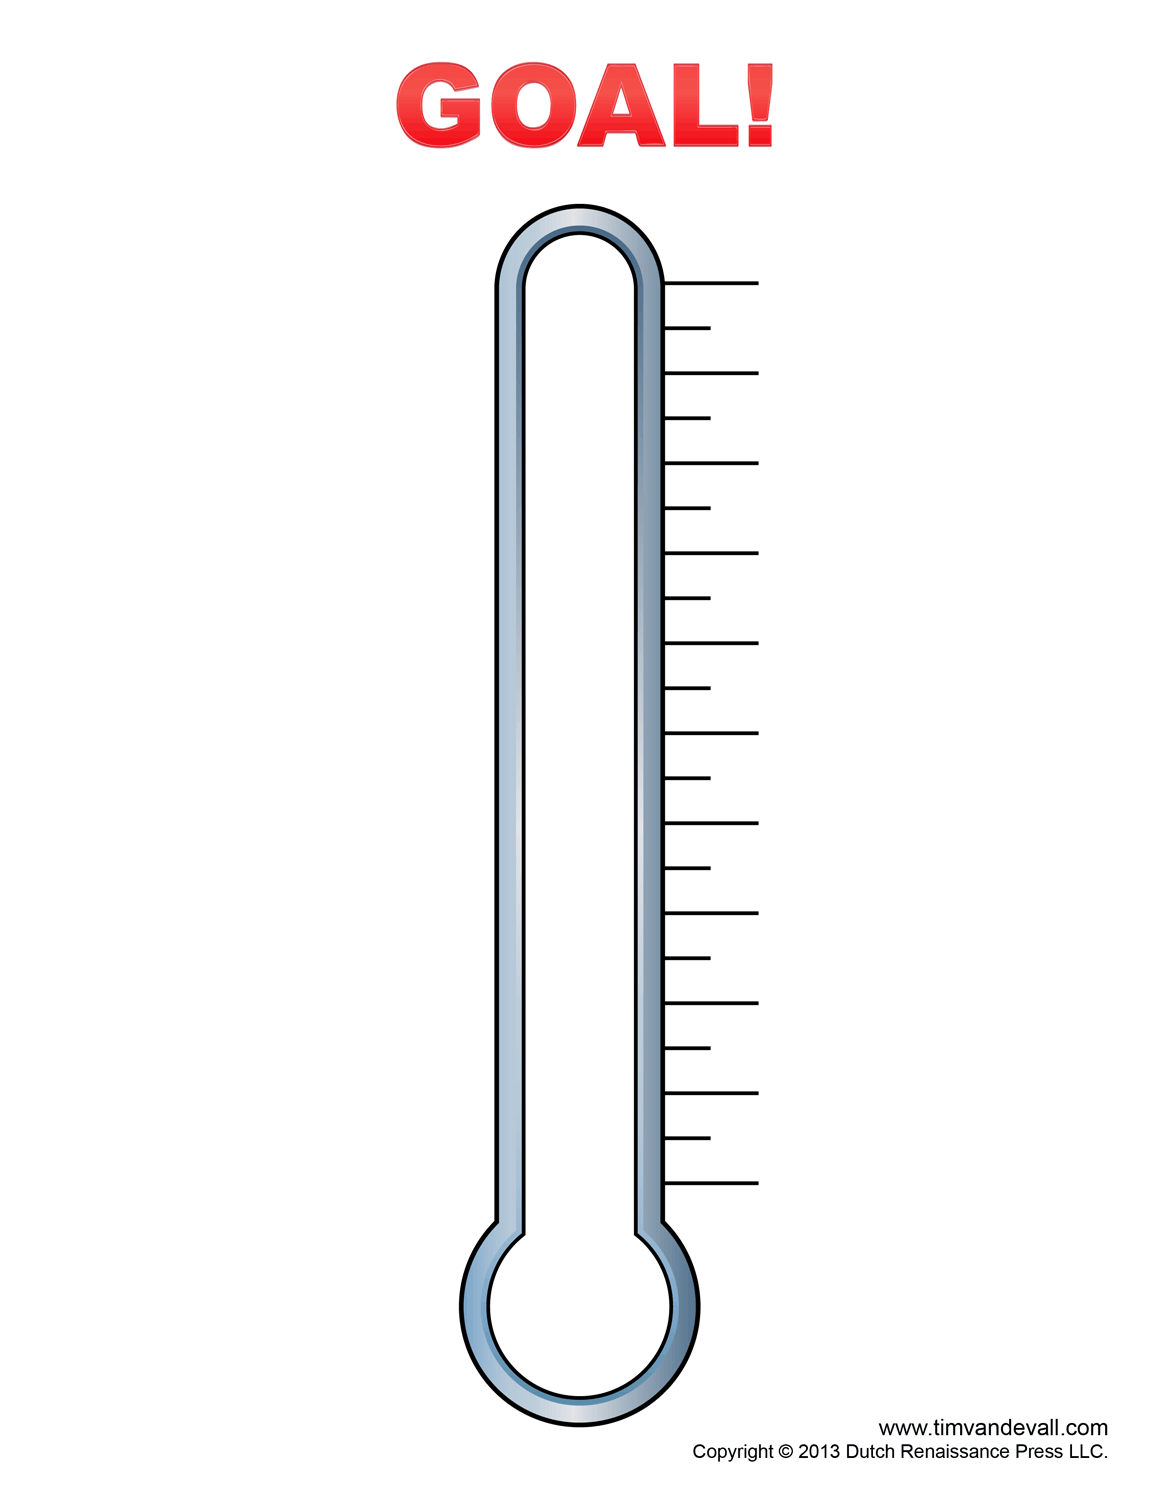 Blank Thermometer Goal Chart